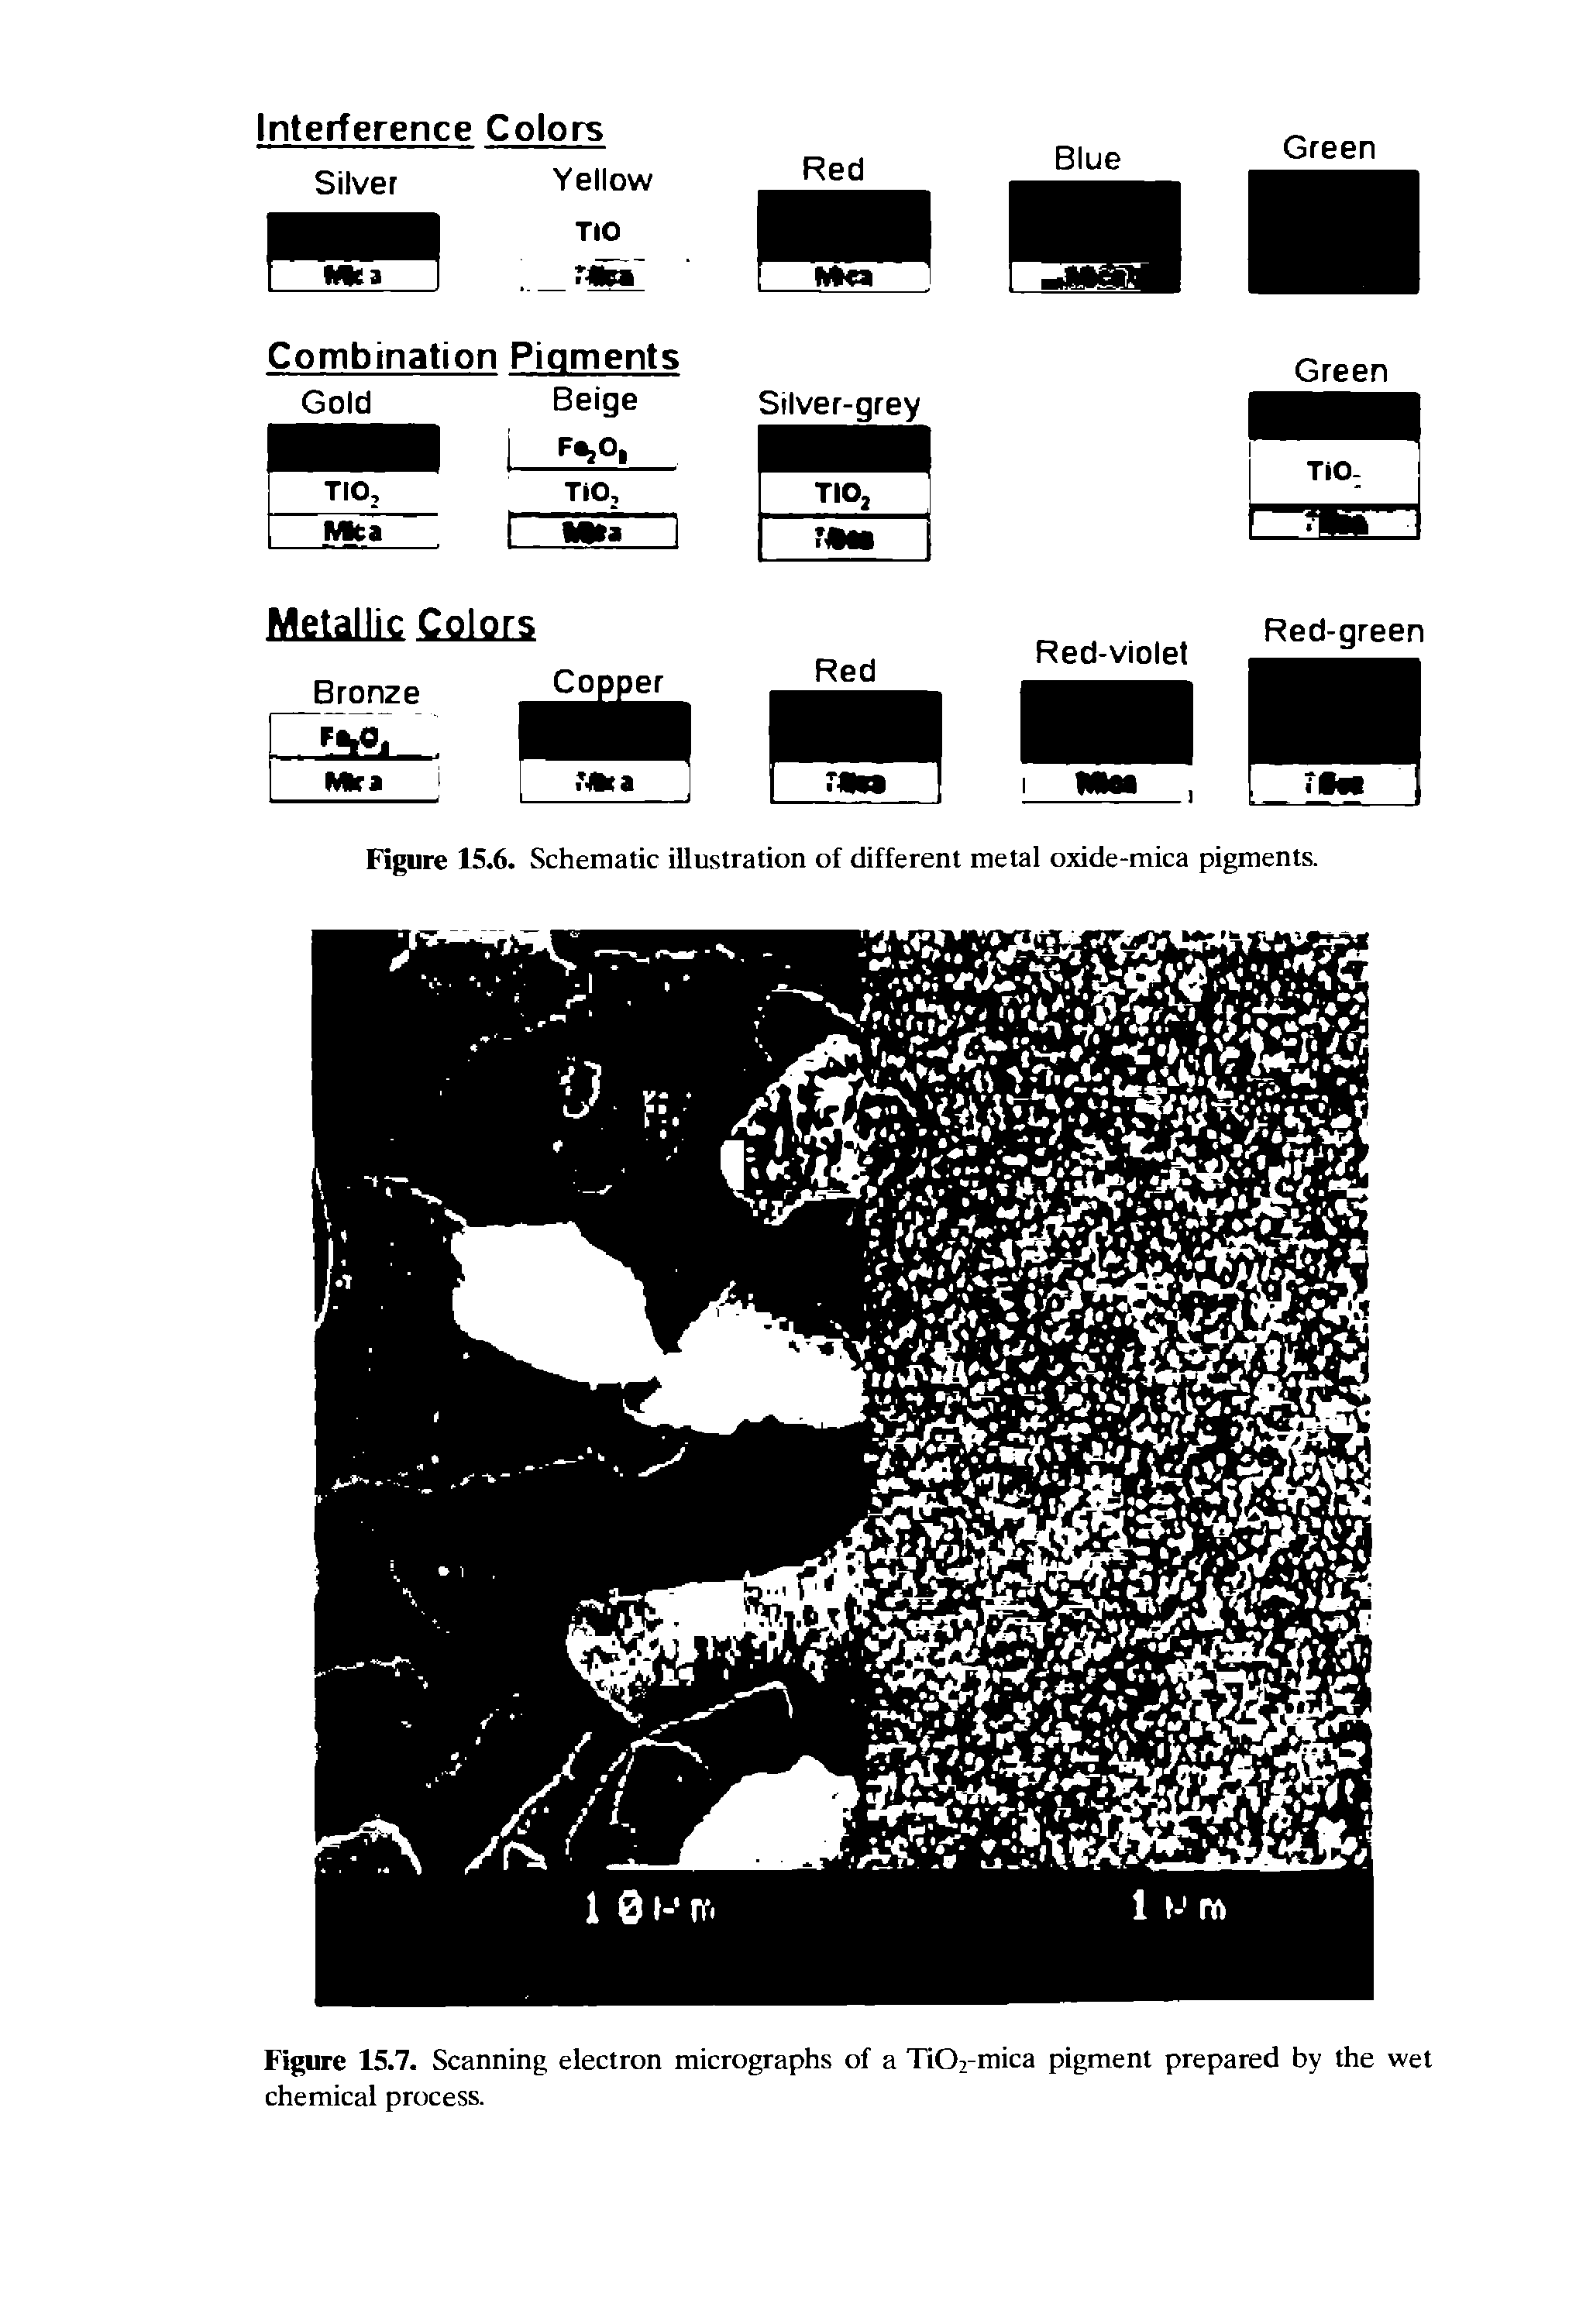 Figure 15.6. Schematic illustration of different metal oxide-mica pigments.